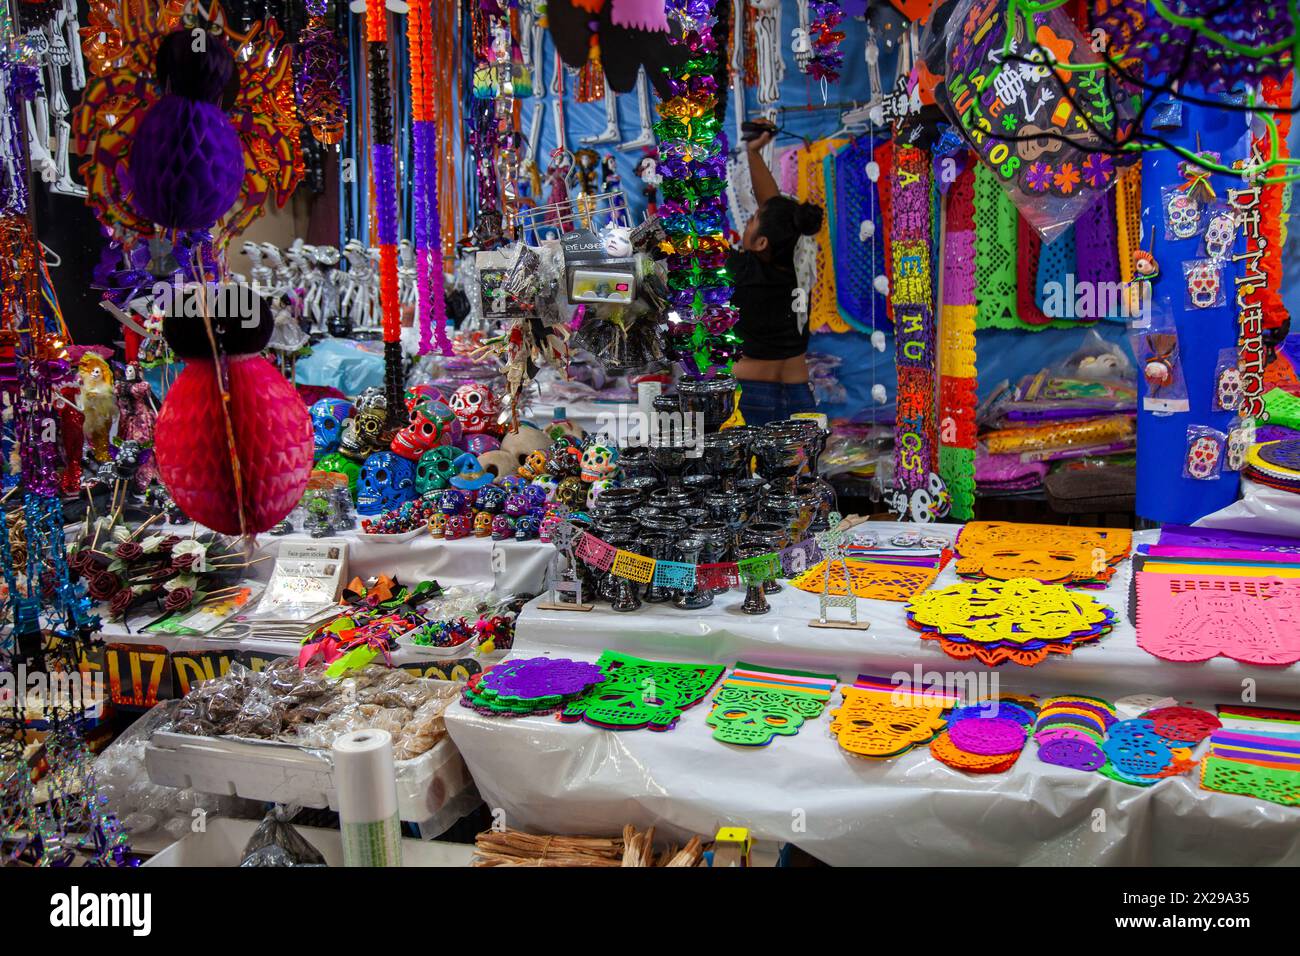 Day of the Dead Paraphenalia at Jamaica Market in Mexico City, Mexico Stock Photo